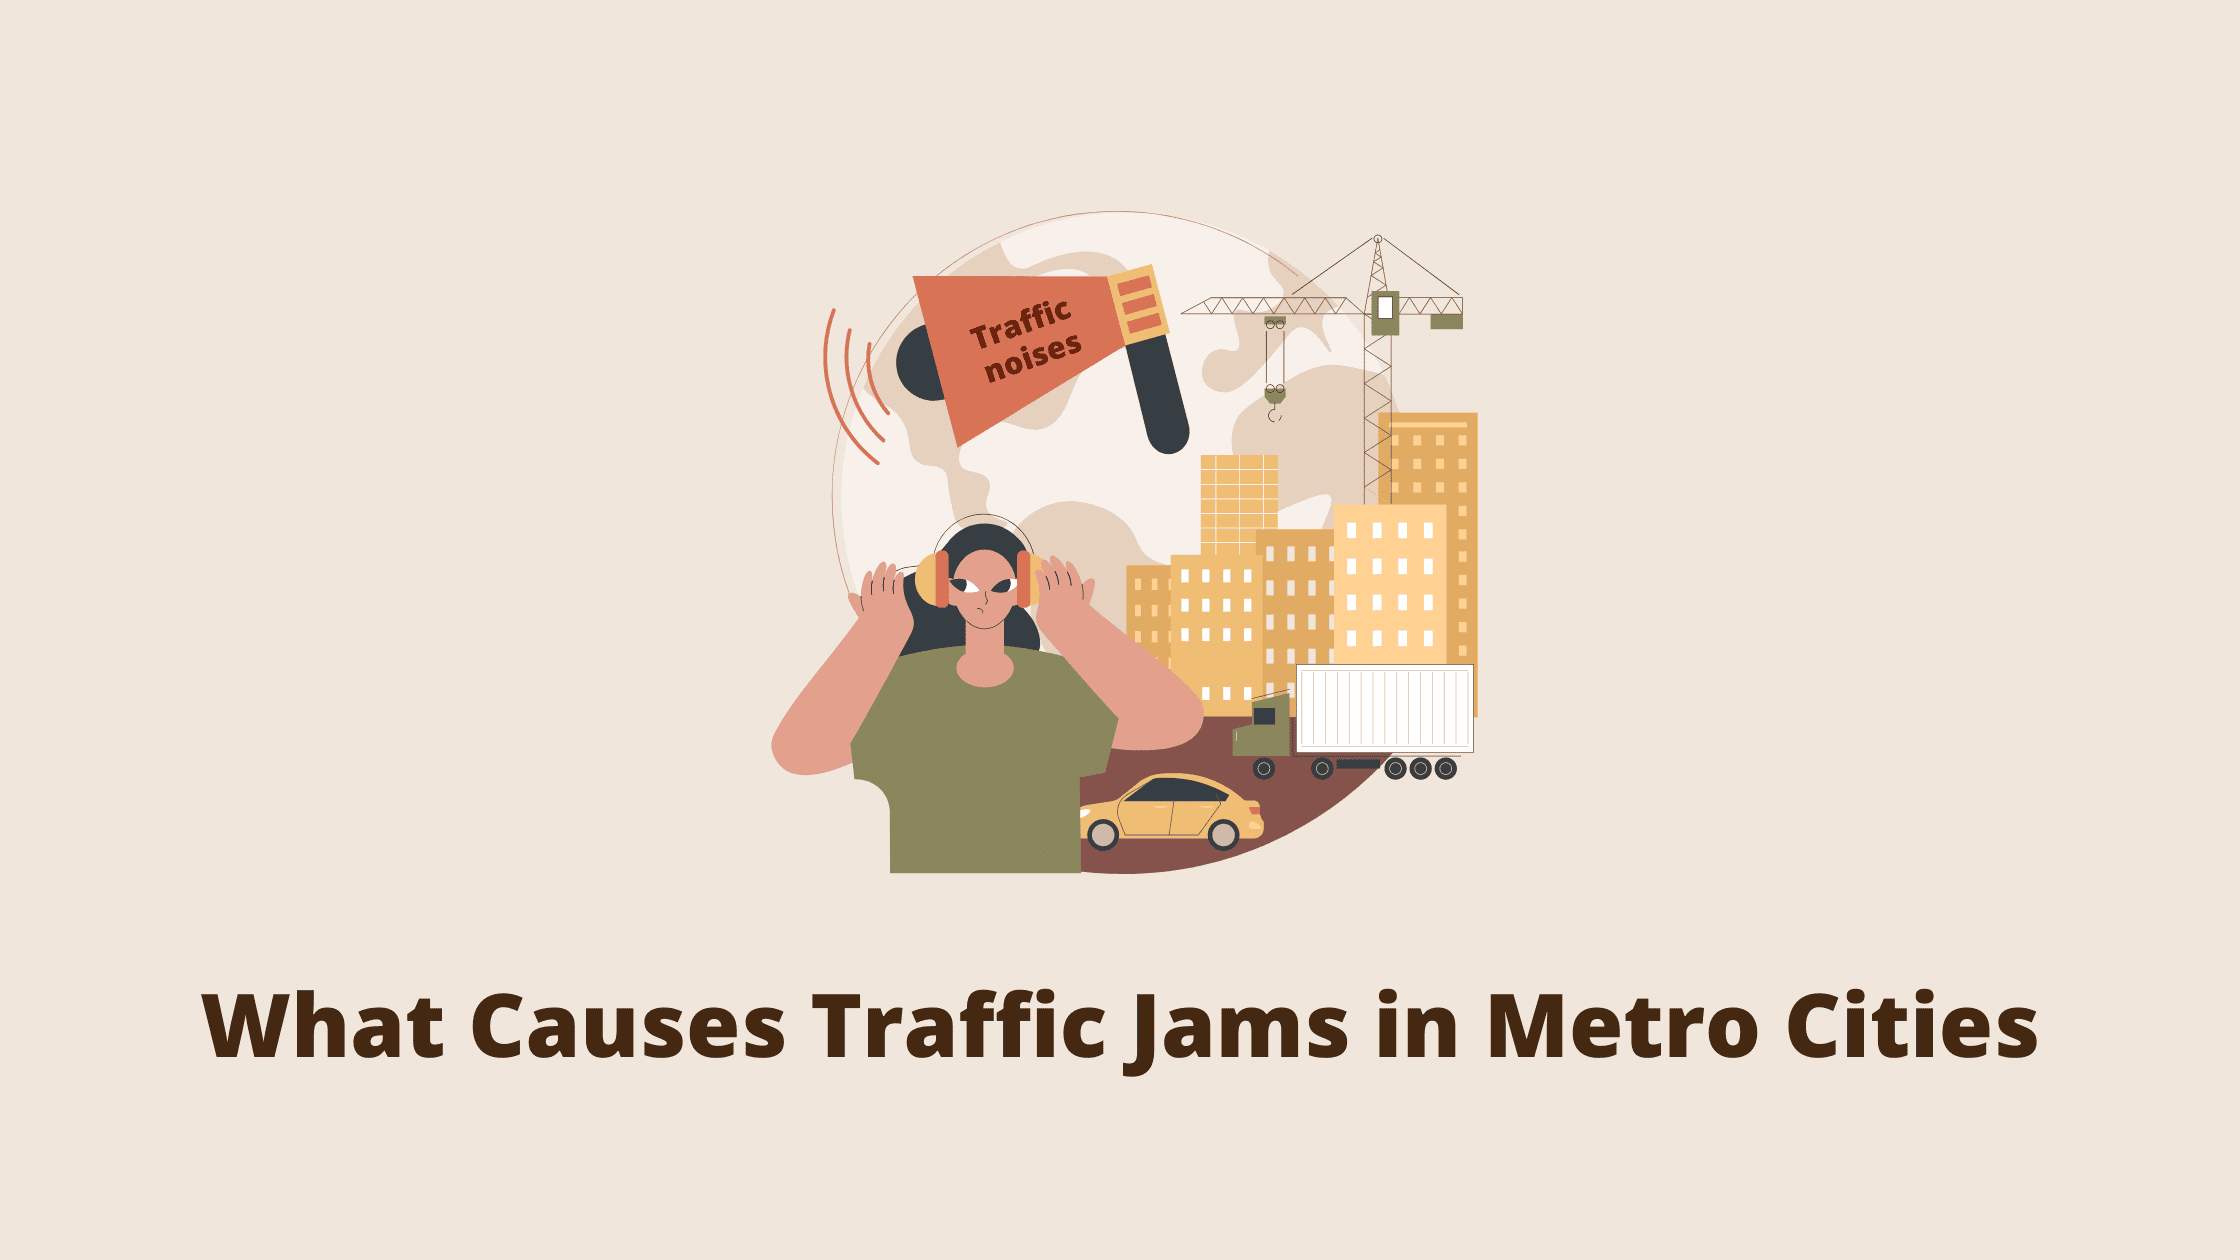 What Causes Traffic Jams in Metro Cities